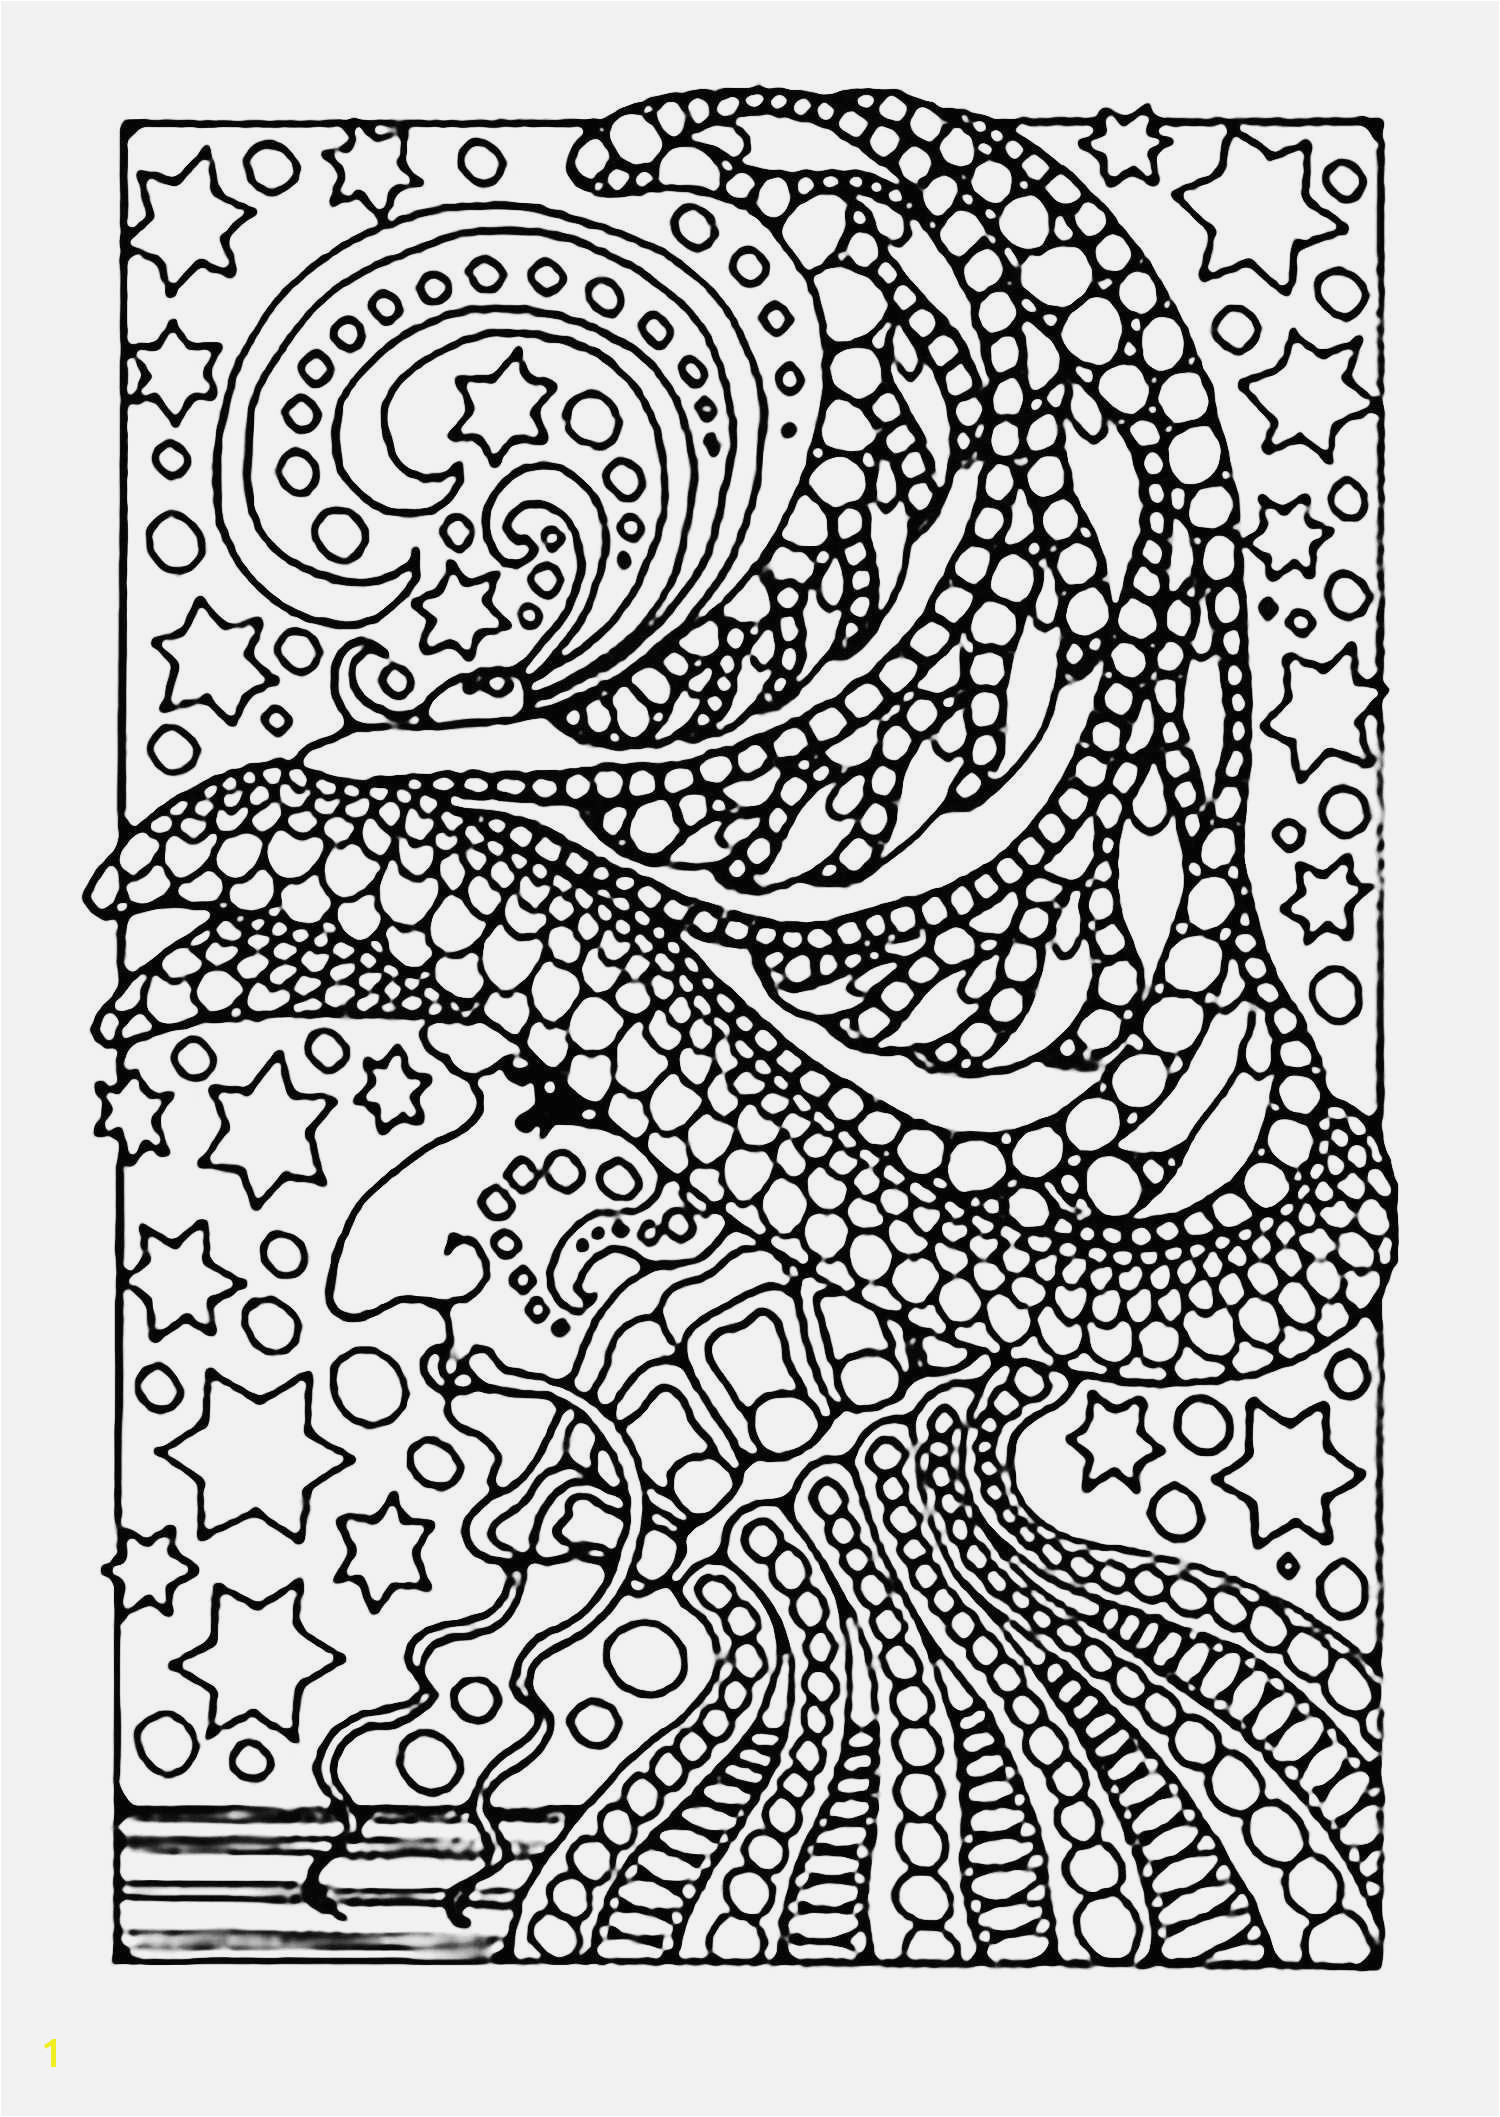 Coloring Pages Hard Amazing Advantages Intricate Coloring Pages Cool Coloring Page Unique Witch Coloring Coloring